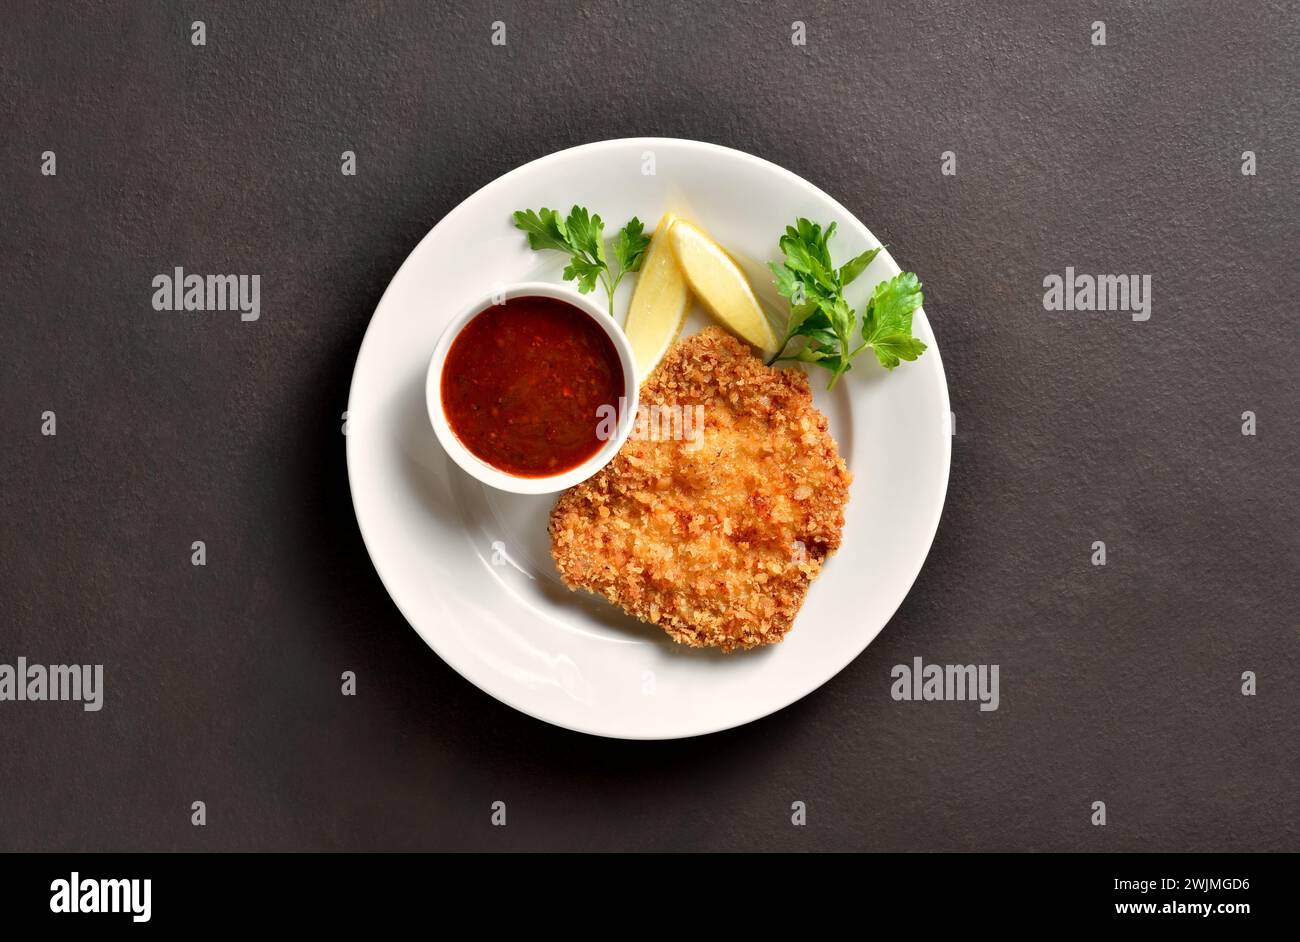 Schnitzel with lemon and leaves of parsley on white plate over brown stone background with copy space. Top view, flat lay Stock Photo